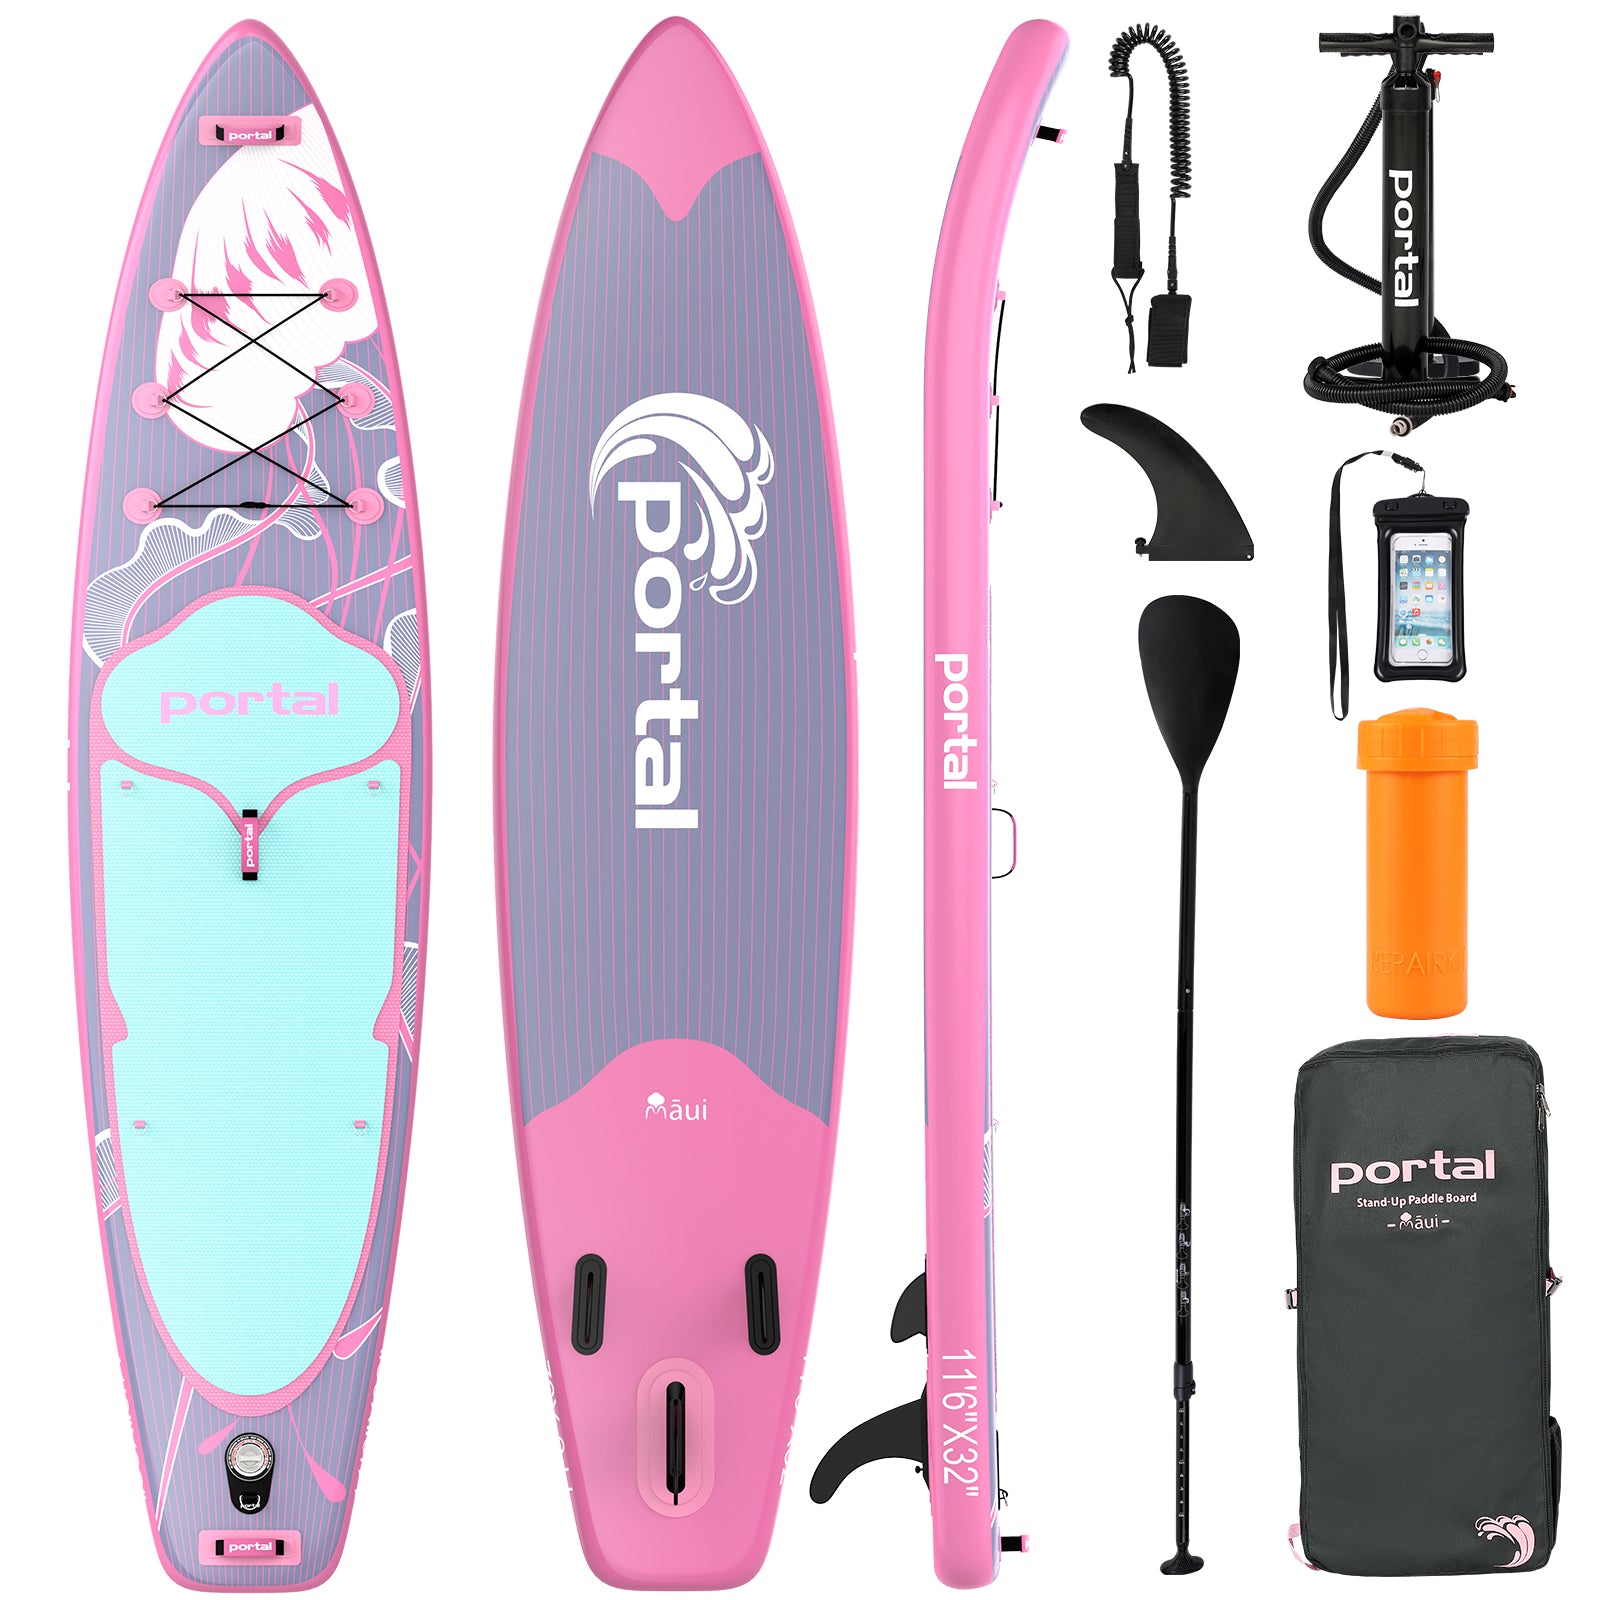 Portal Outdoors Māui Inflatable Stand Up Paddle Board 11'6"x32"x6"